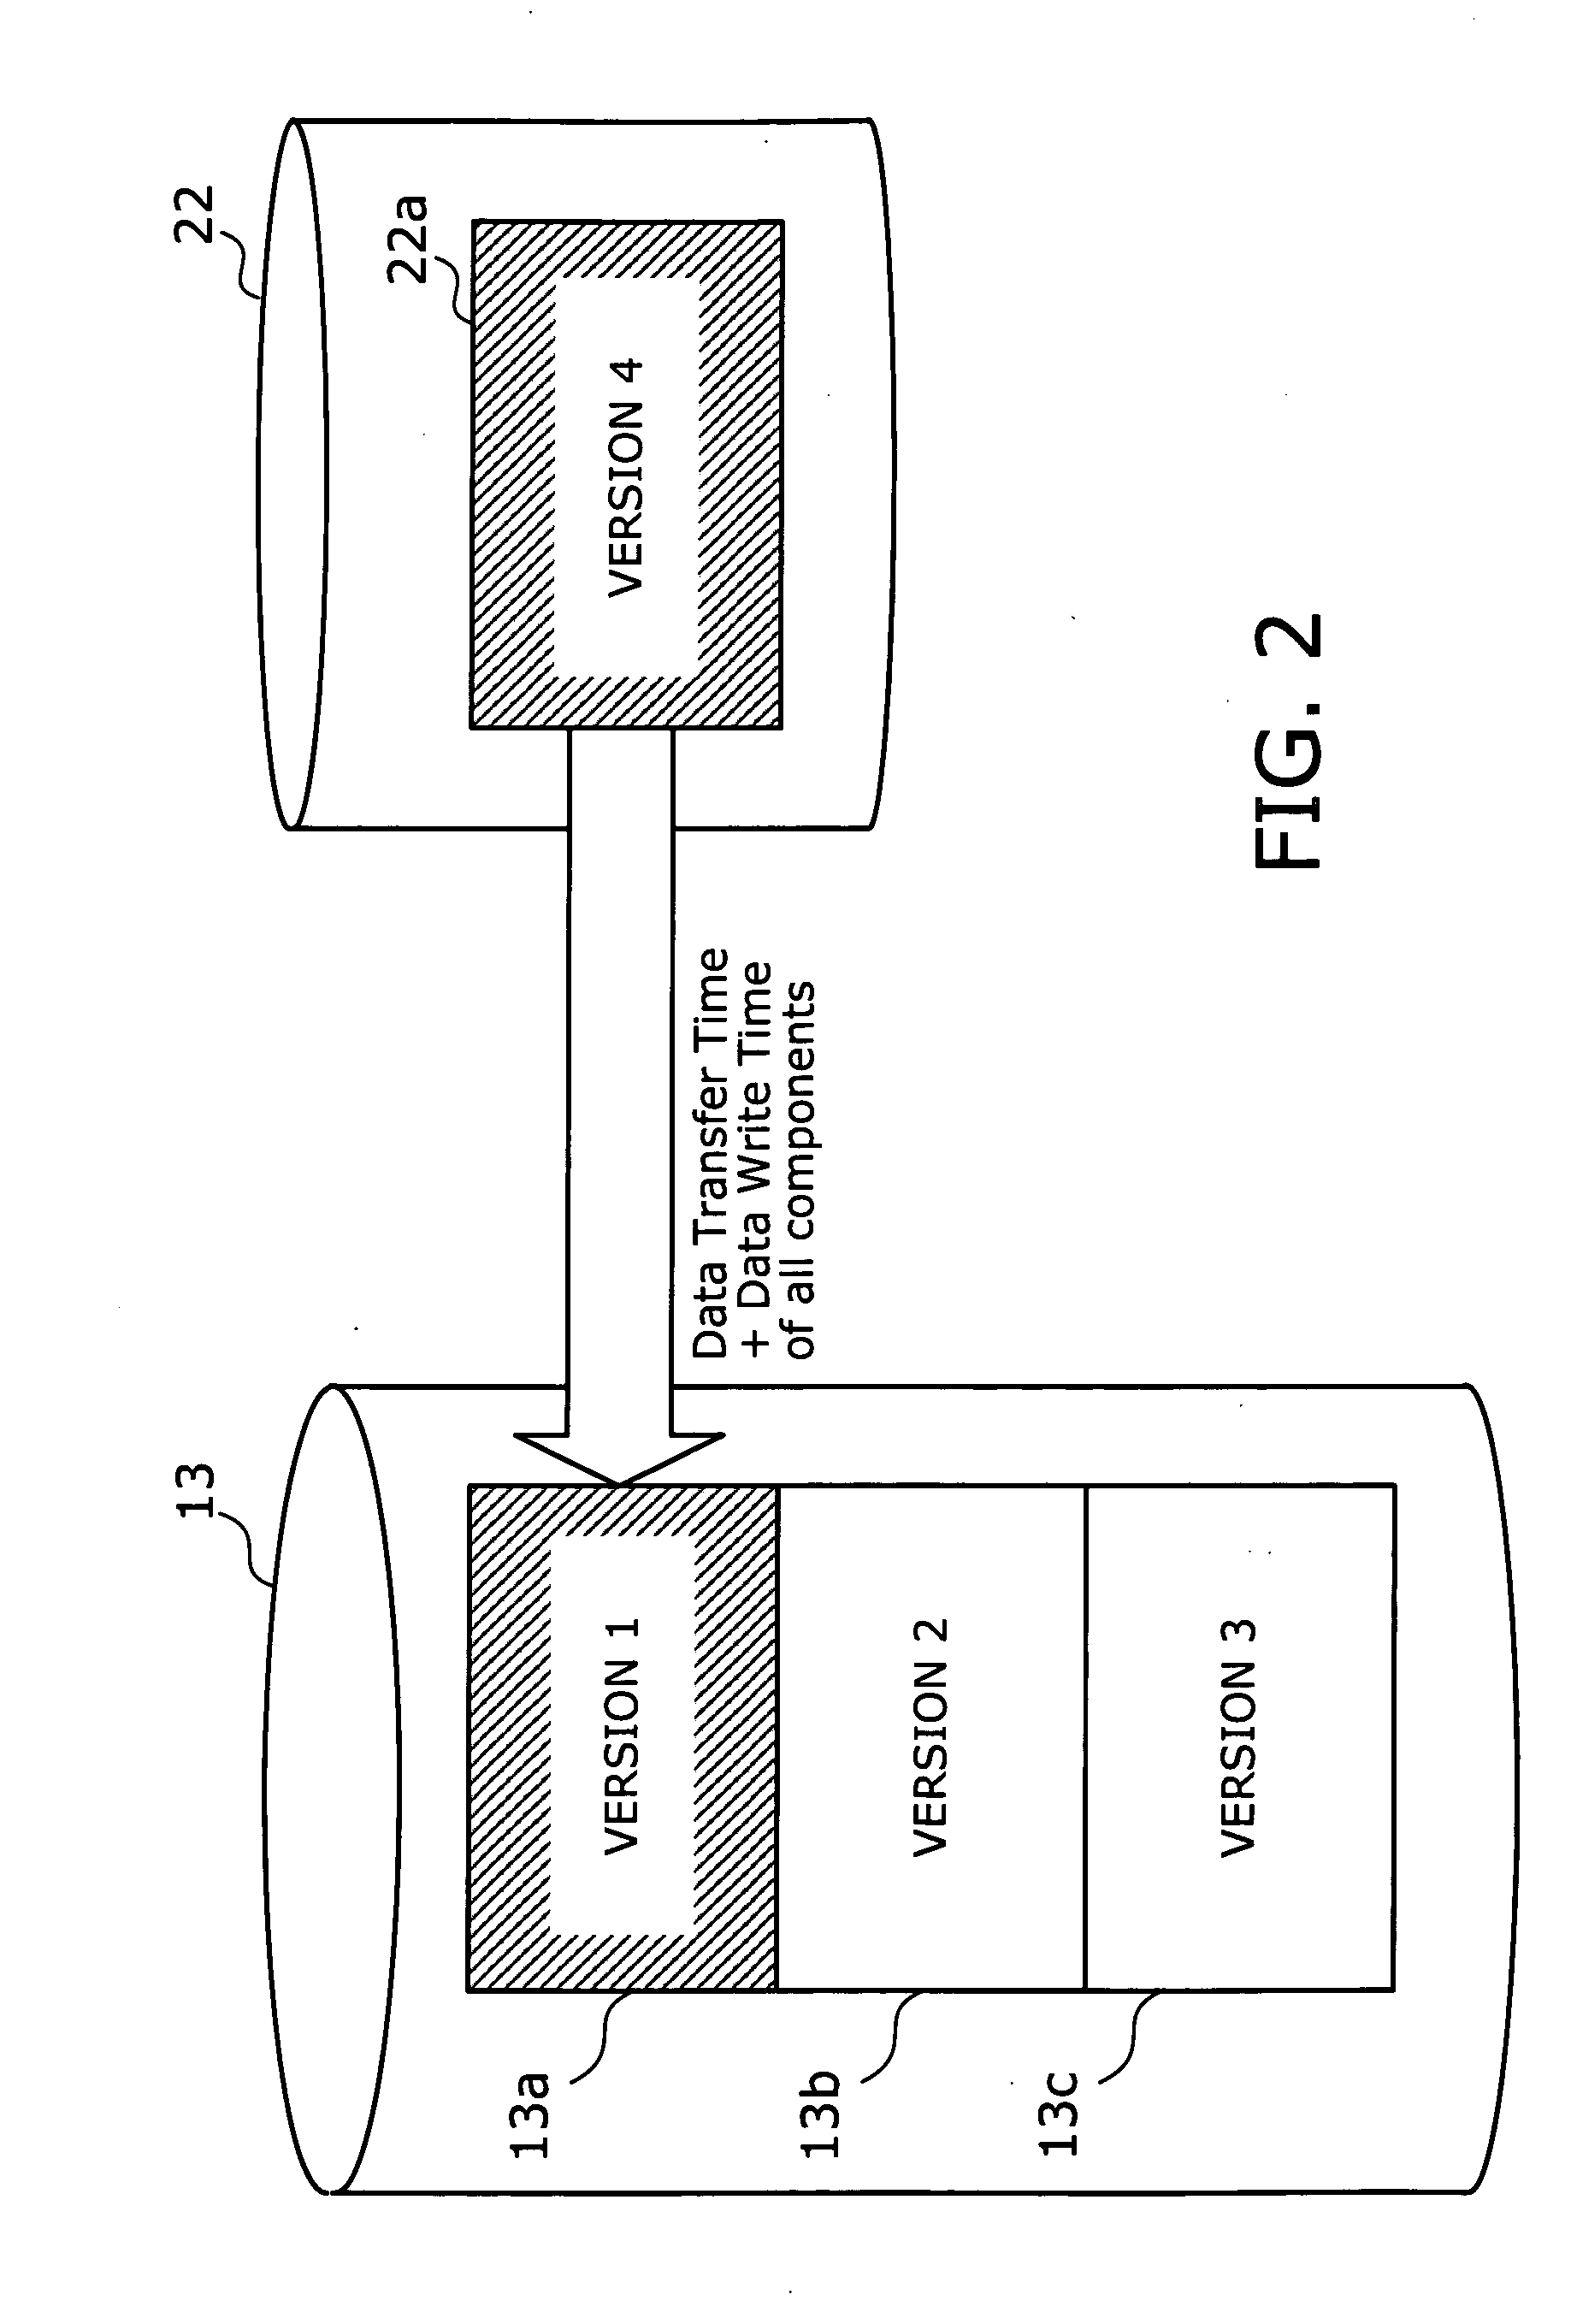 Computer program and apparatus for updating installed software programs